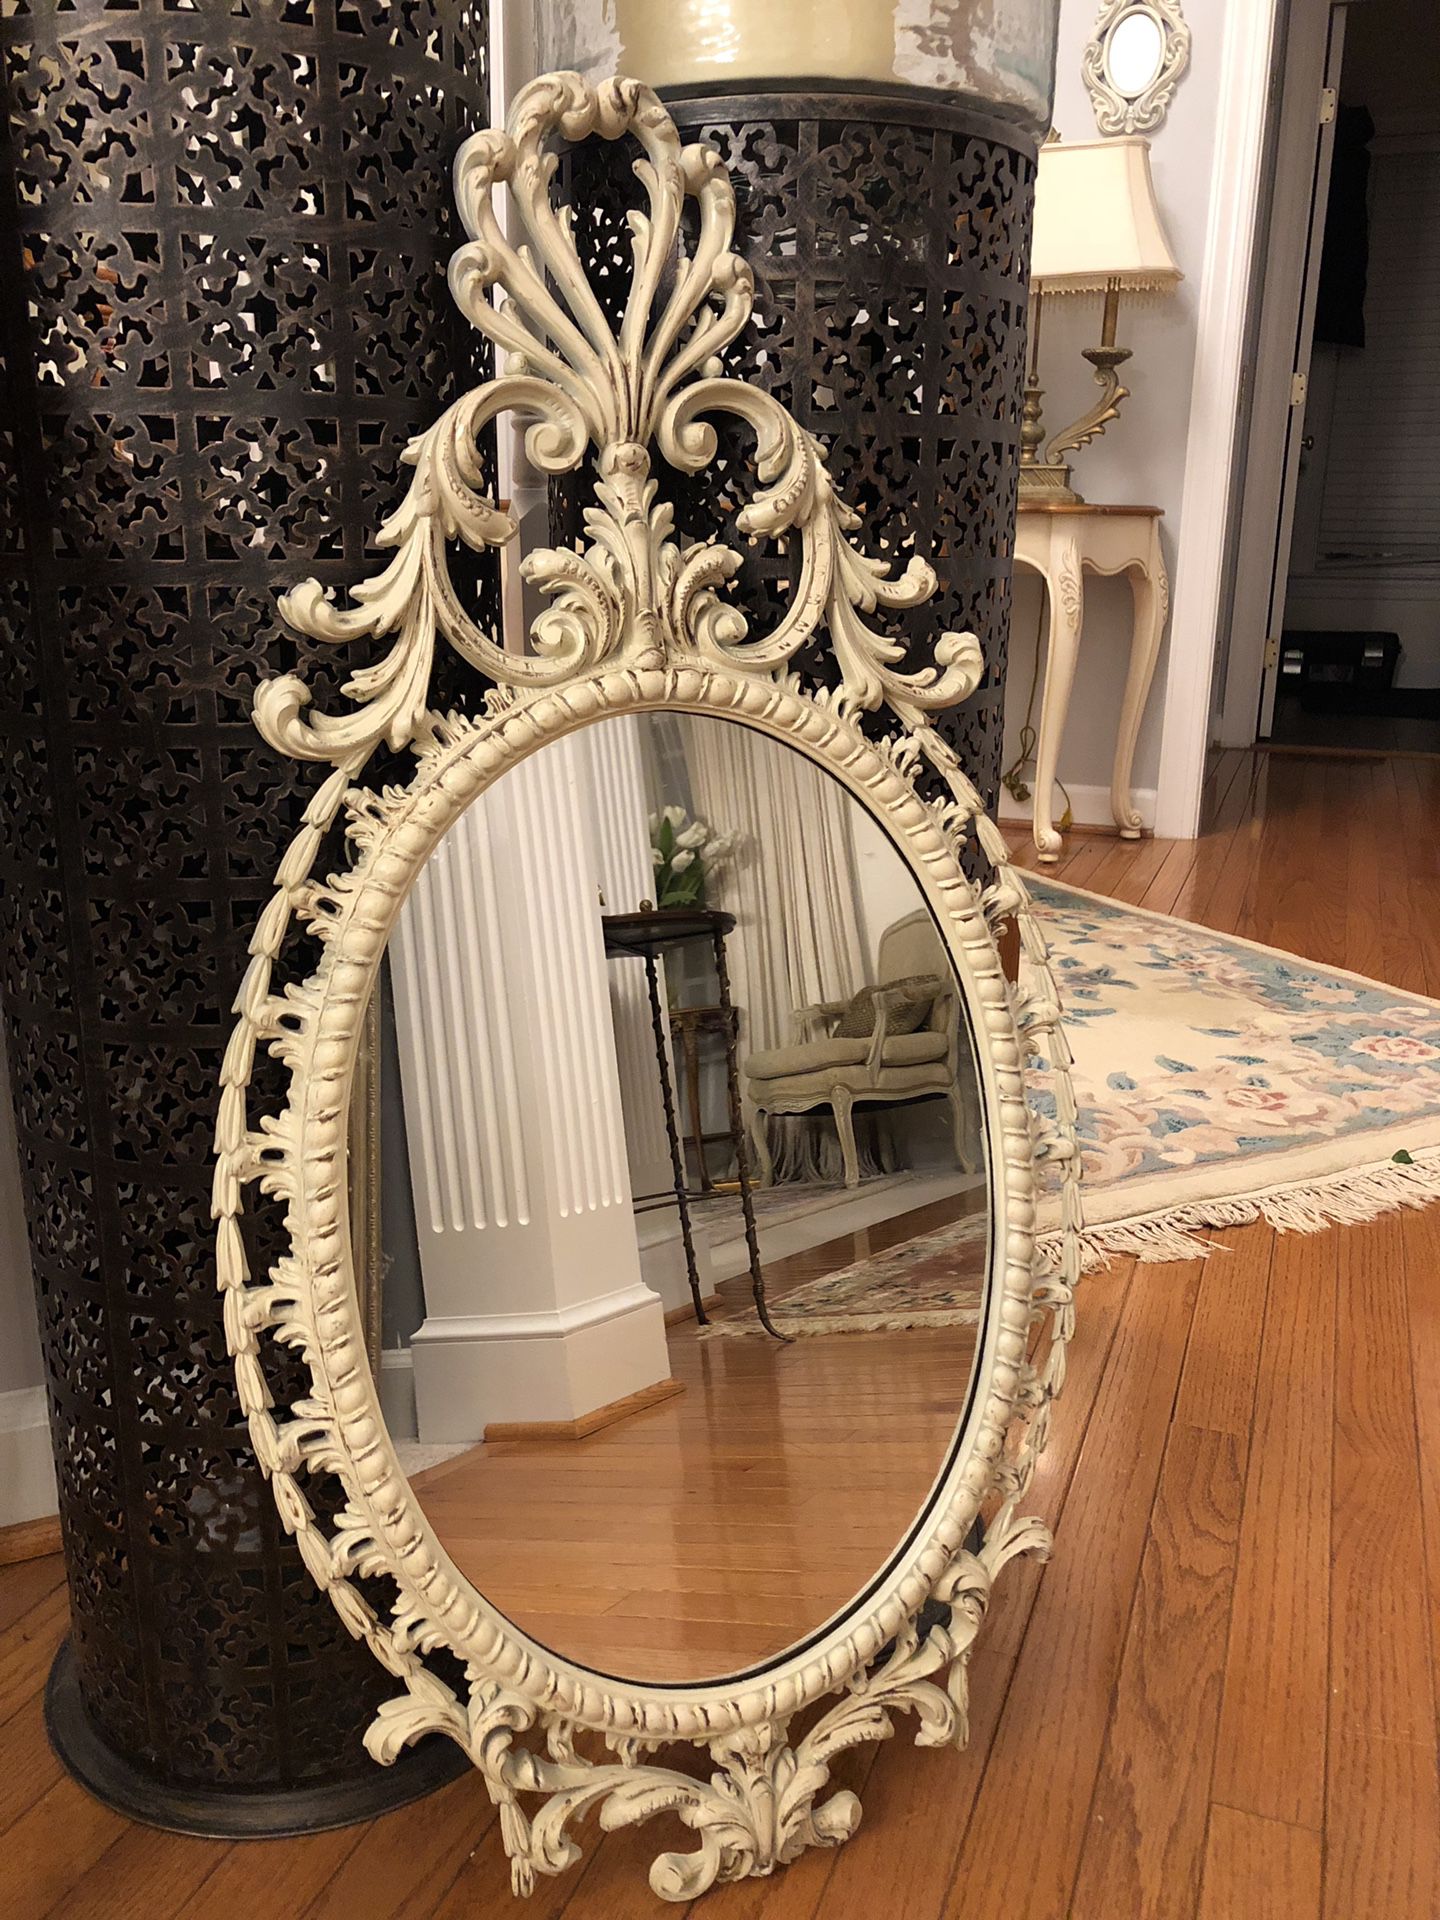 33”X17”Antique Ornate Baroque Shabby Chic Ivory Distressed Mirror